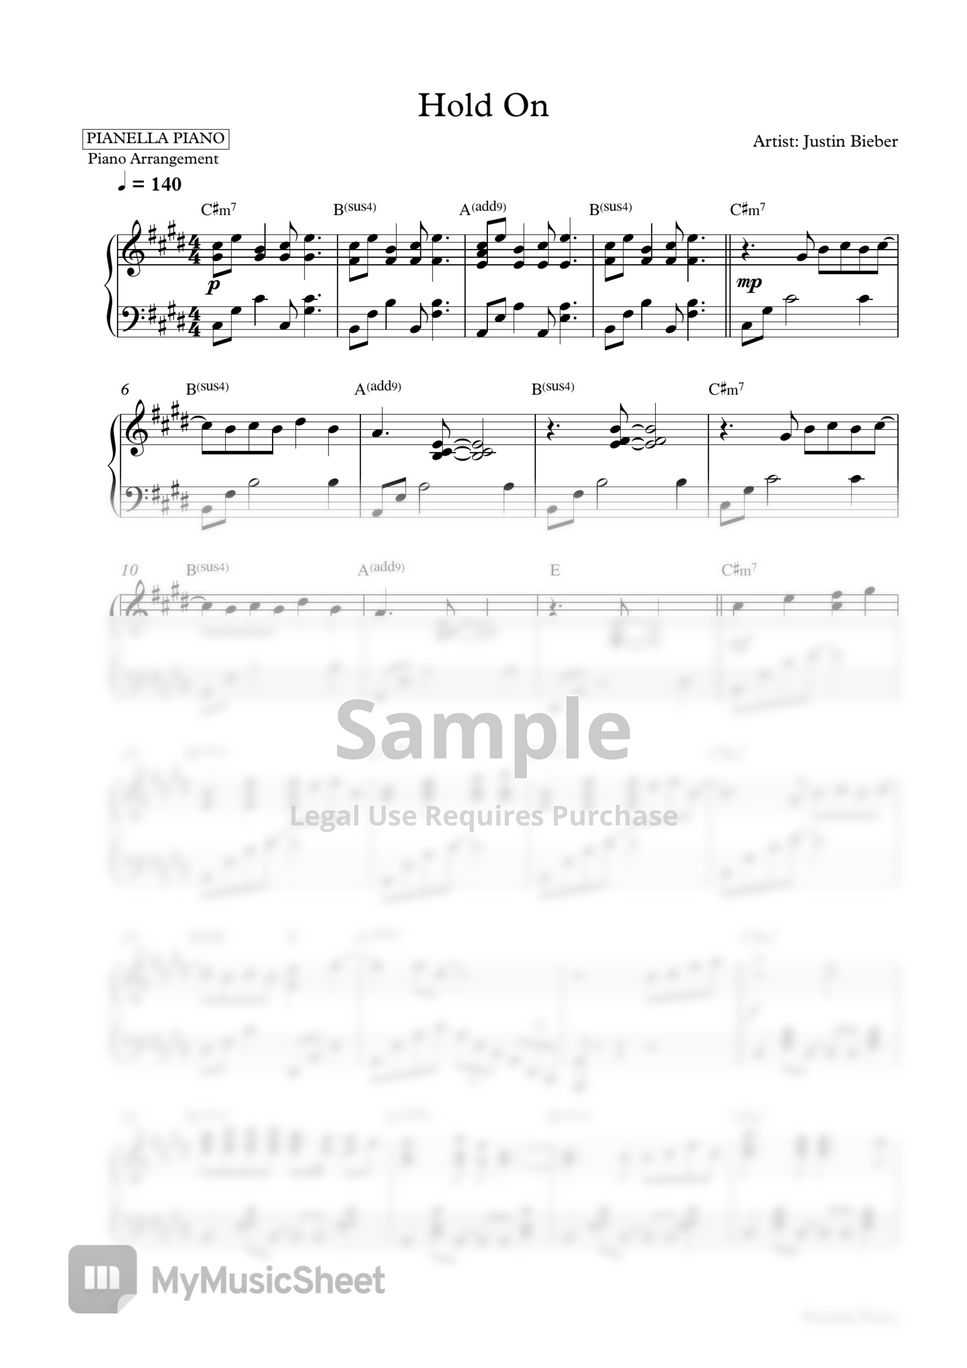 Justin Bieber - Hold On (Piano Sheet) by Pianella Piano